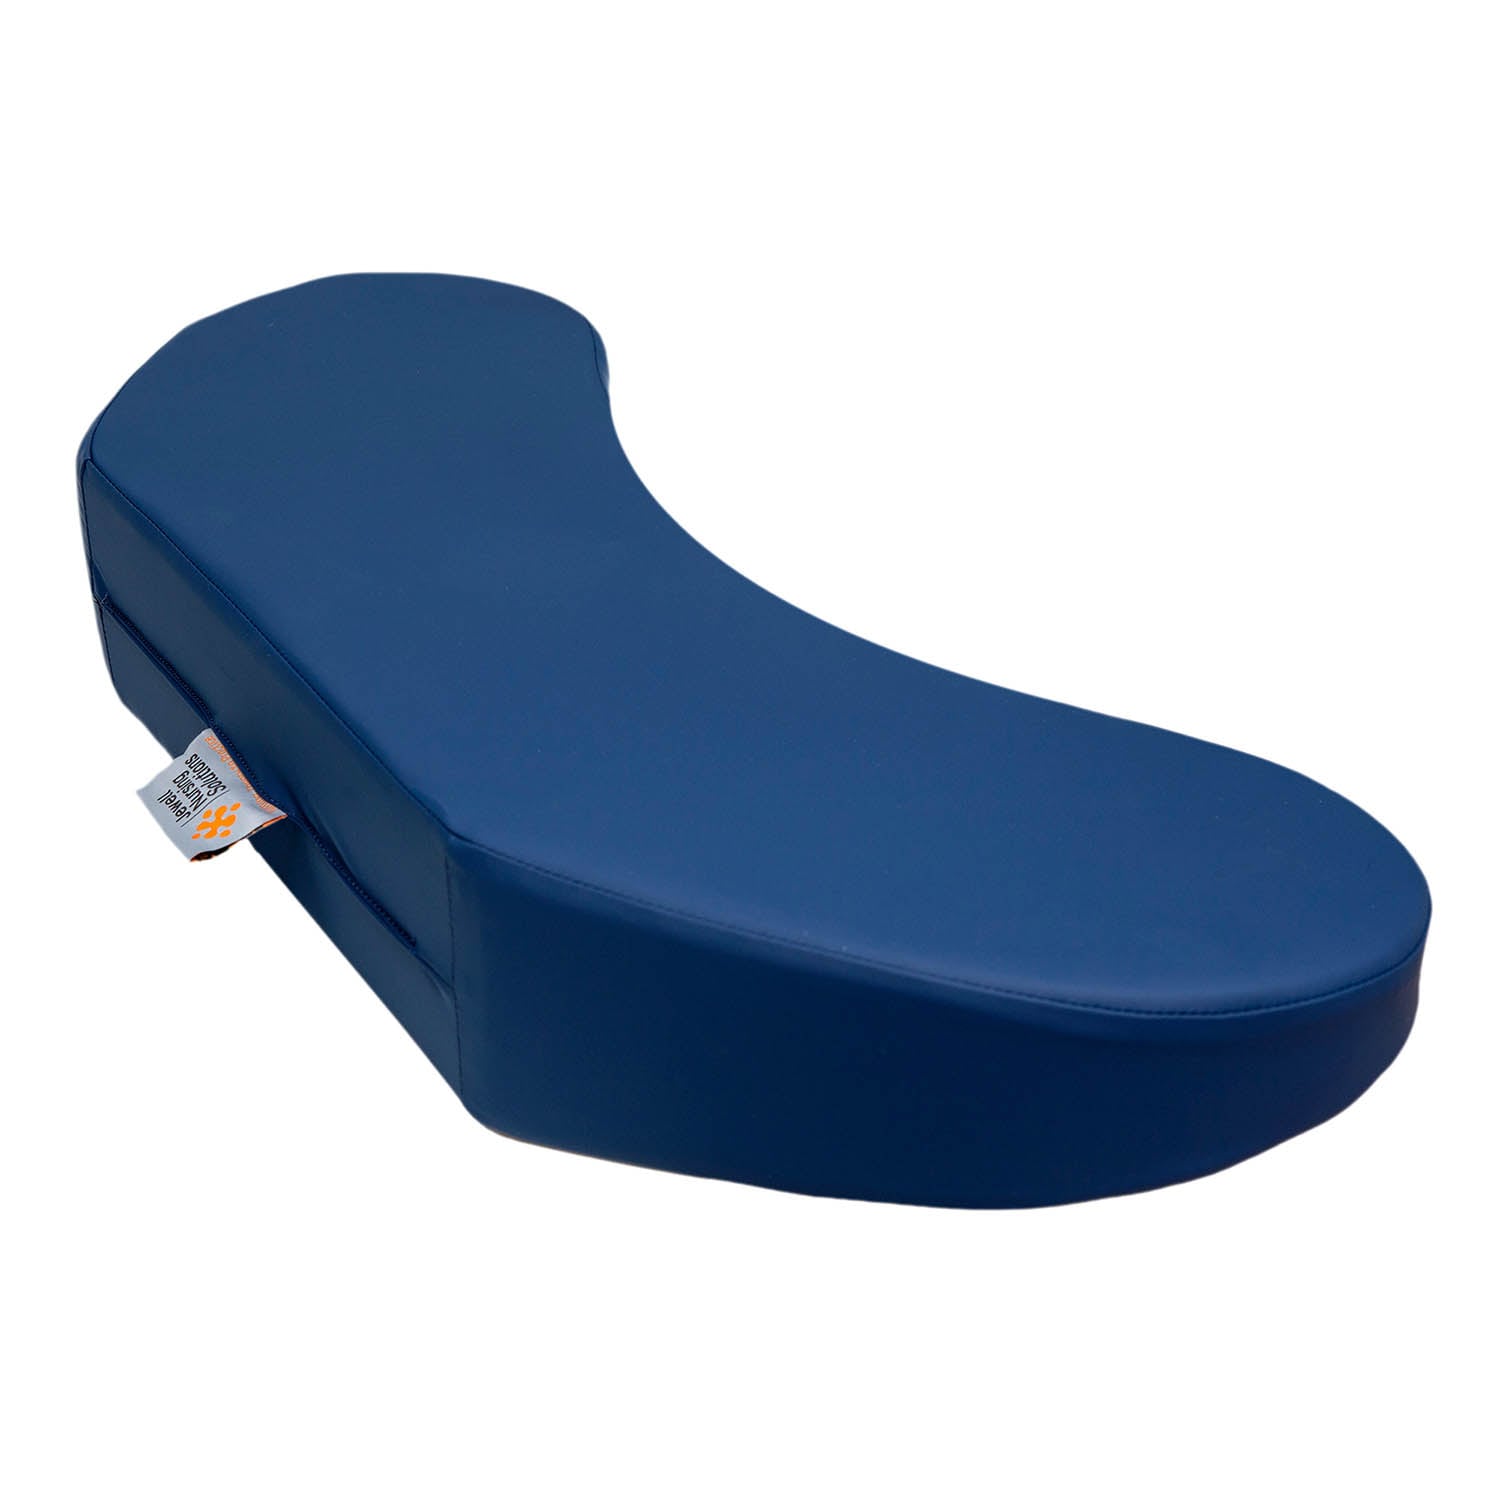 Bedsore Rescue® Positioning Wedge Cushion for Medical – with Non